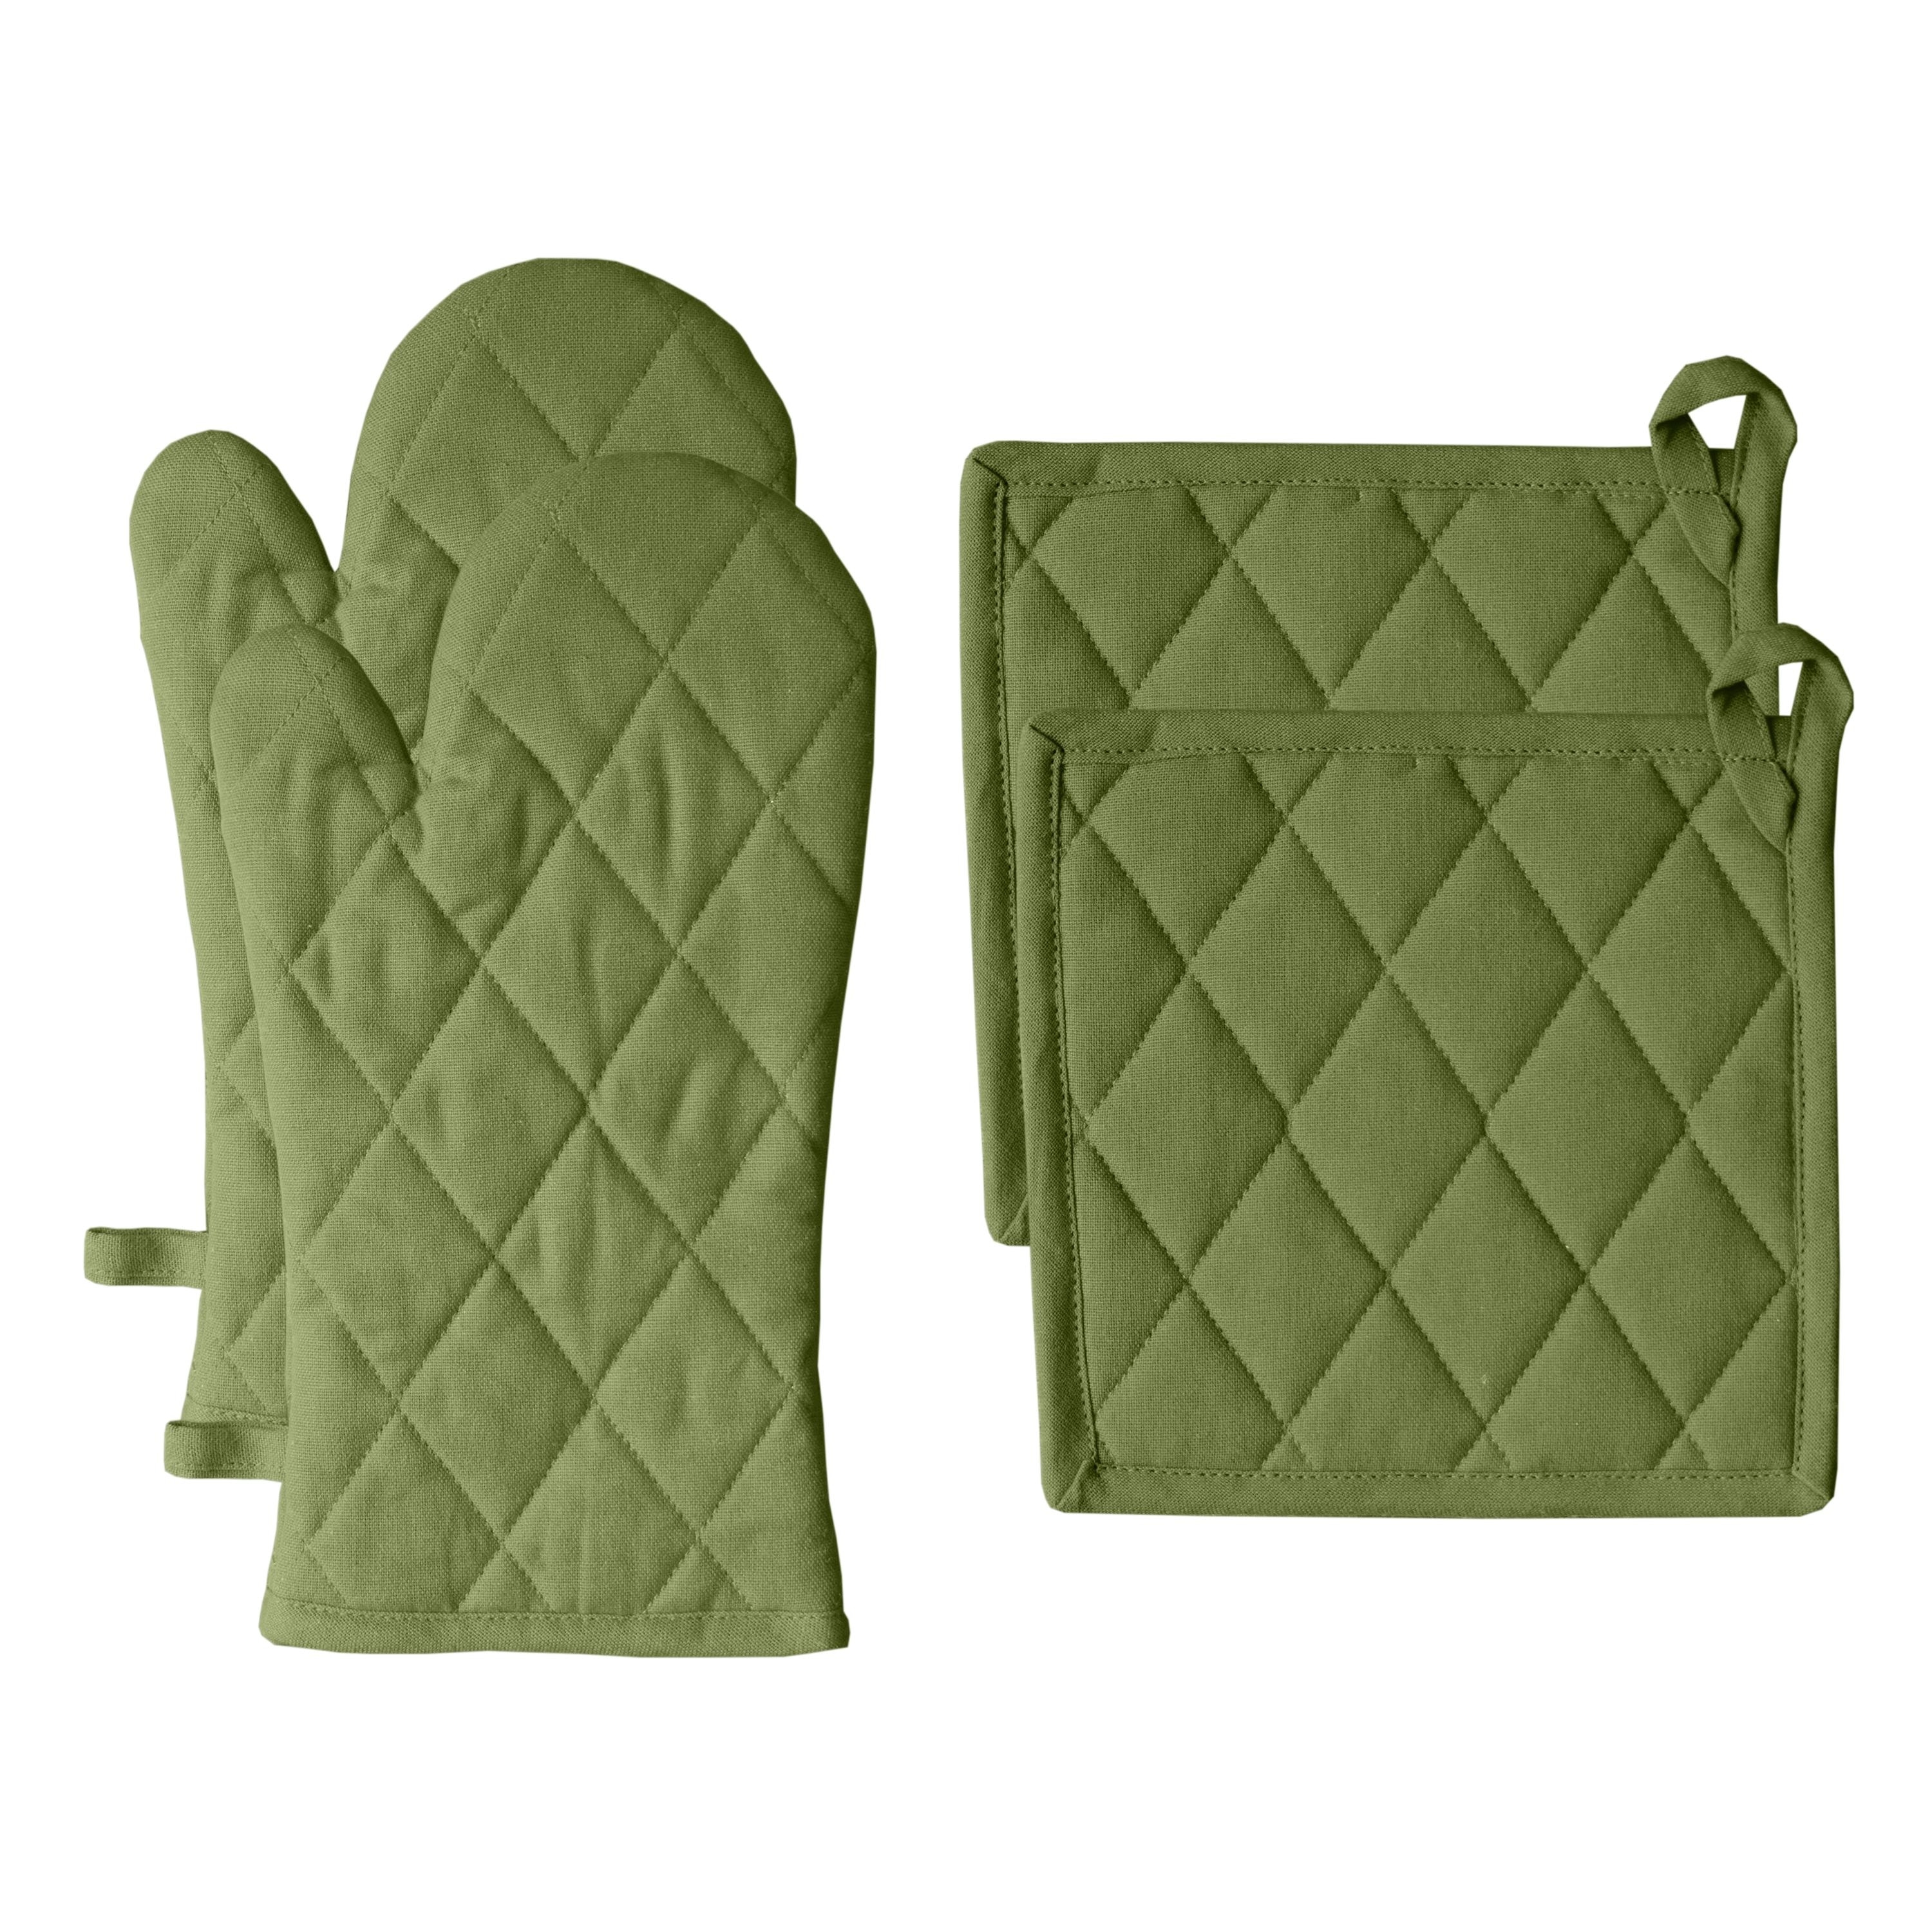 https://ak1.ostkcdn.com/images/products/is/images/direct/4e660f11e4126e1a7a24b1da073f29fb95dd5138/Fabstyles-Solo-Waffle-Cotton-Oven-Mitt-%26-Pot-Holder-Set-of-4.jpg